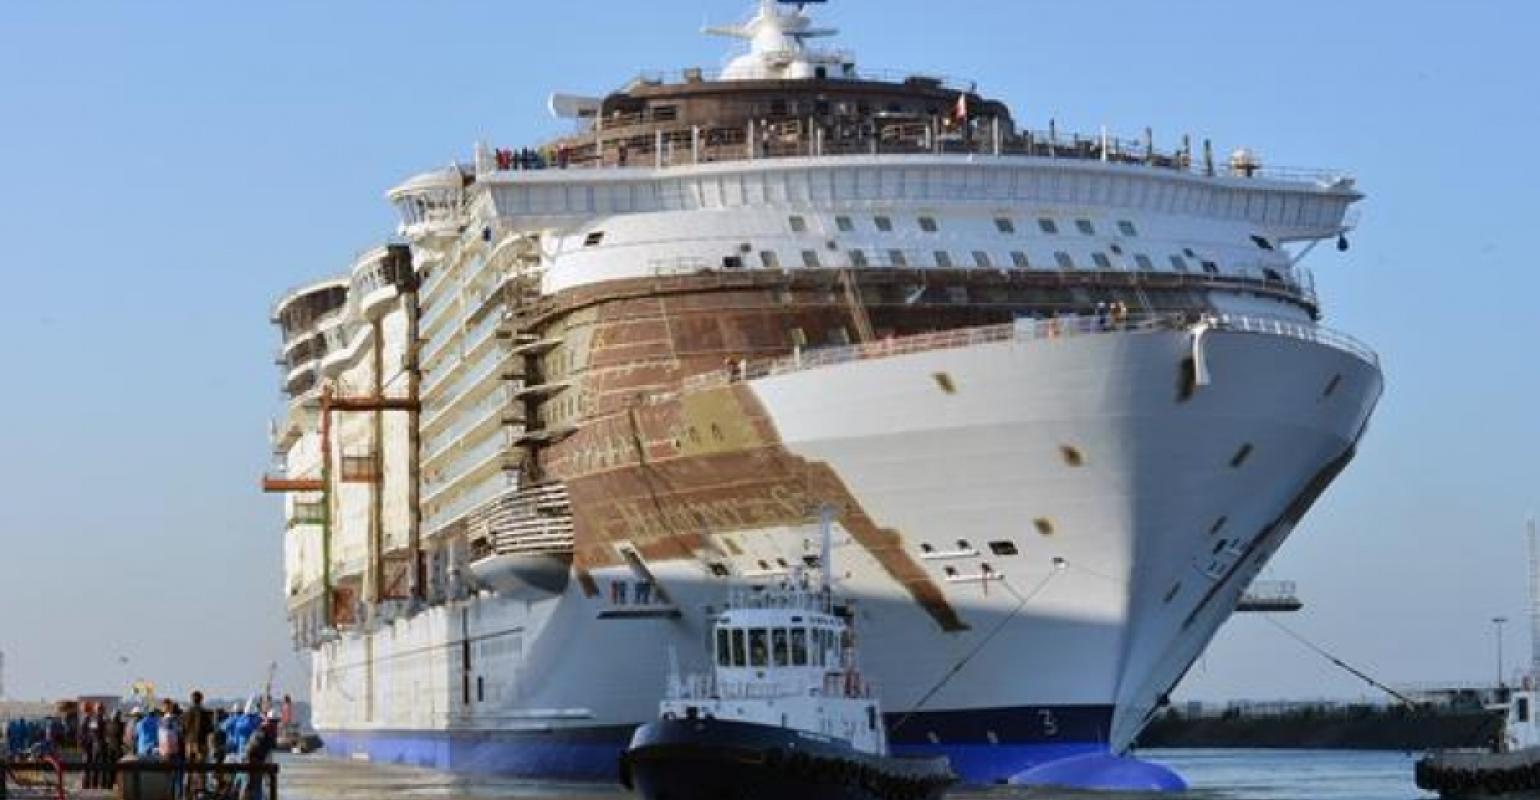 Worlds Largest Cruise Ship Floats Out At Saint Nazaire Seatrade